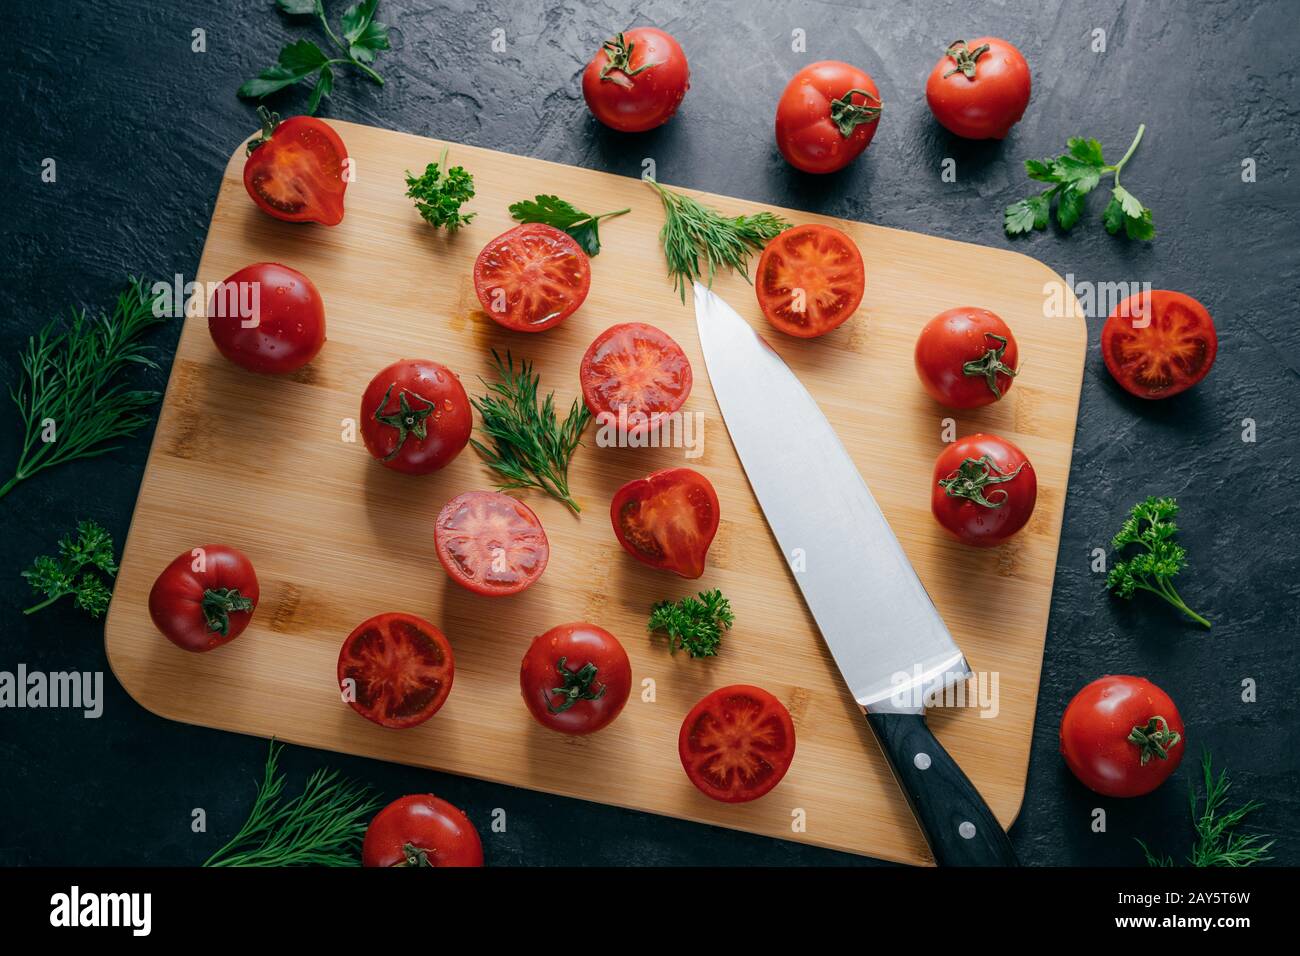 Tasty ripe tomatoes sliced on chopping board with greenery, sharp knife near, isolated over dark background. Kitchenware. Top view. Stock Photo